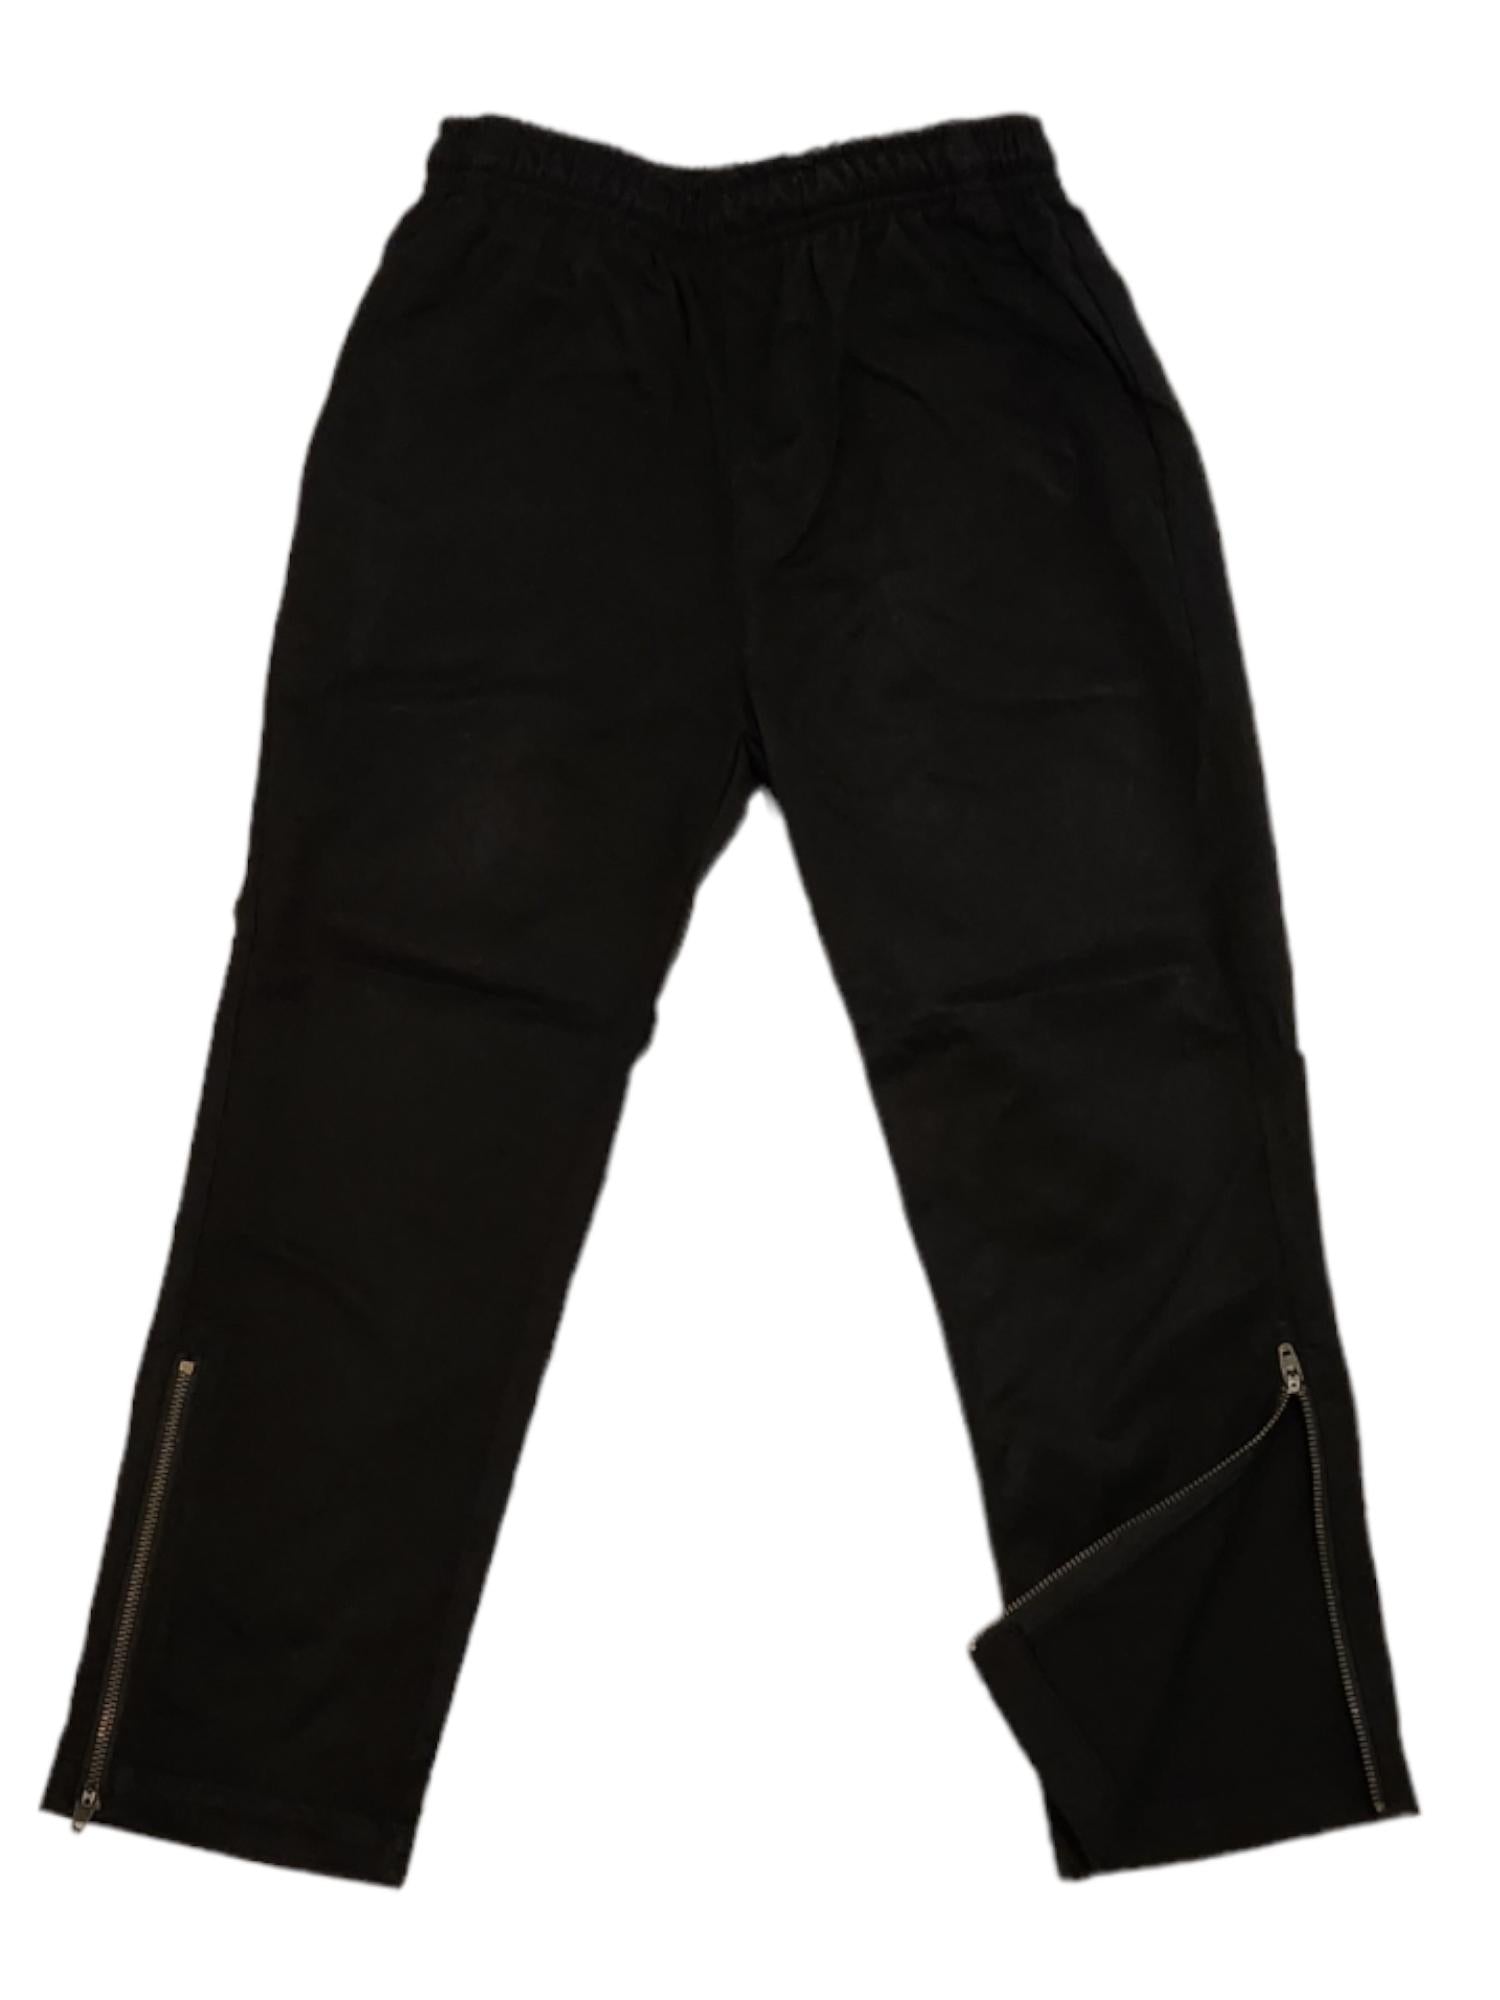 Lloyd style black cotton polyester trouser with metal zips at ankle and drawstring waist with two front pockets 